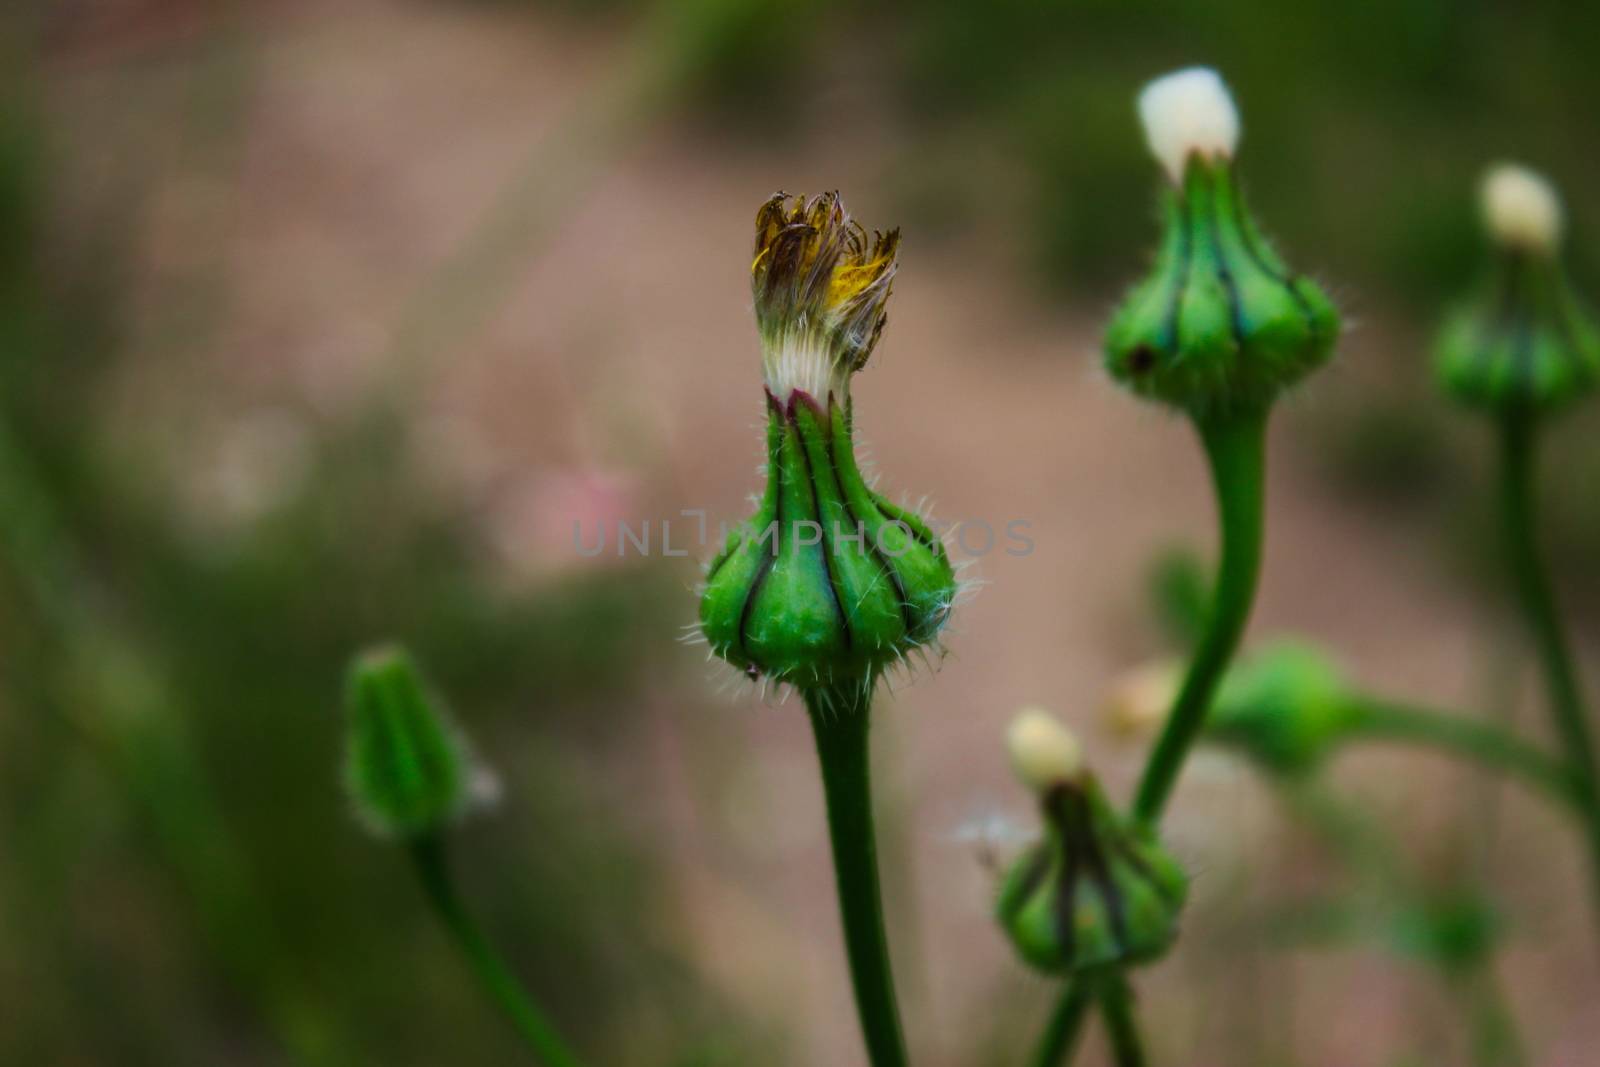 Close up of dandelion flower ready to open. Ready for seed head. Beja, Portugal.